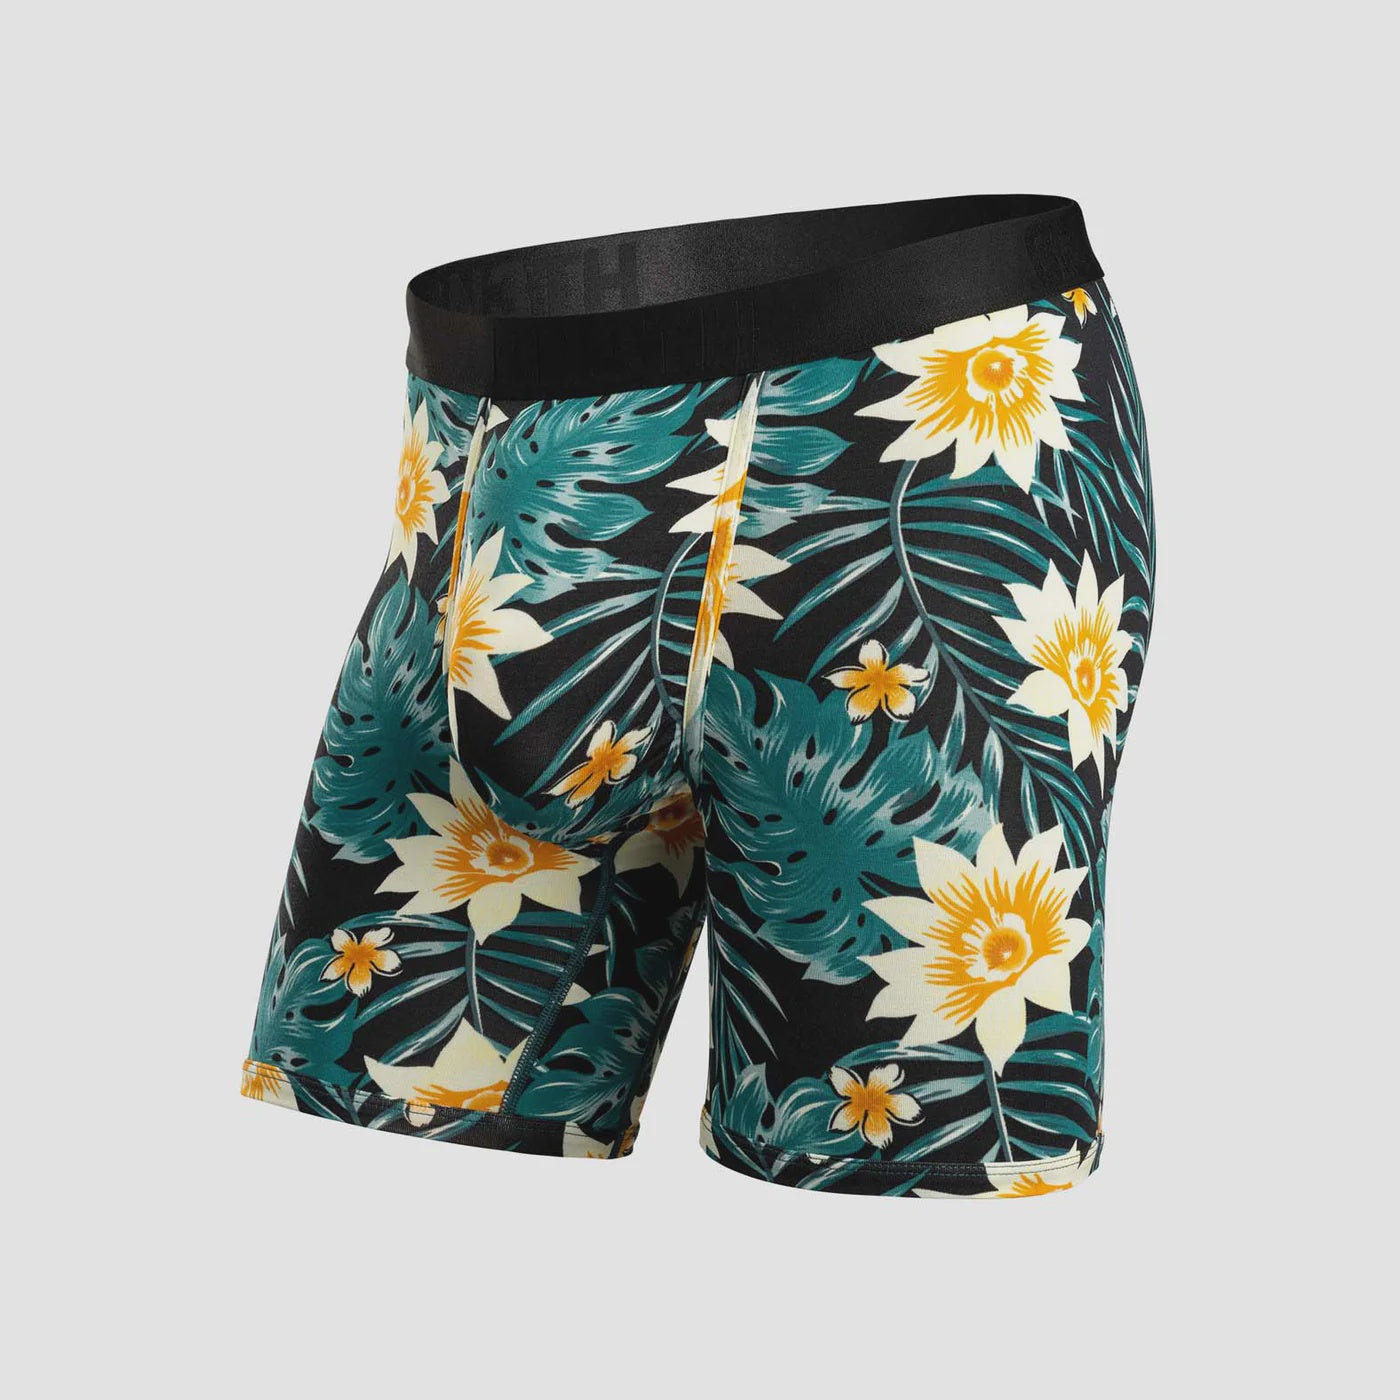 BN3TH - CLASSIC BOXER BRIEF PRINT IN TROPICAL FLORAL - BLACK